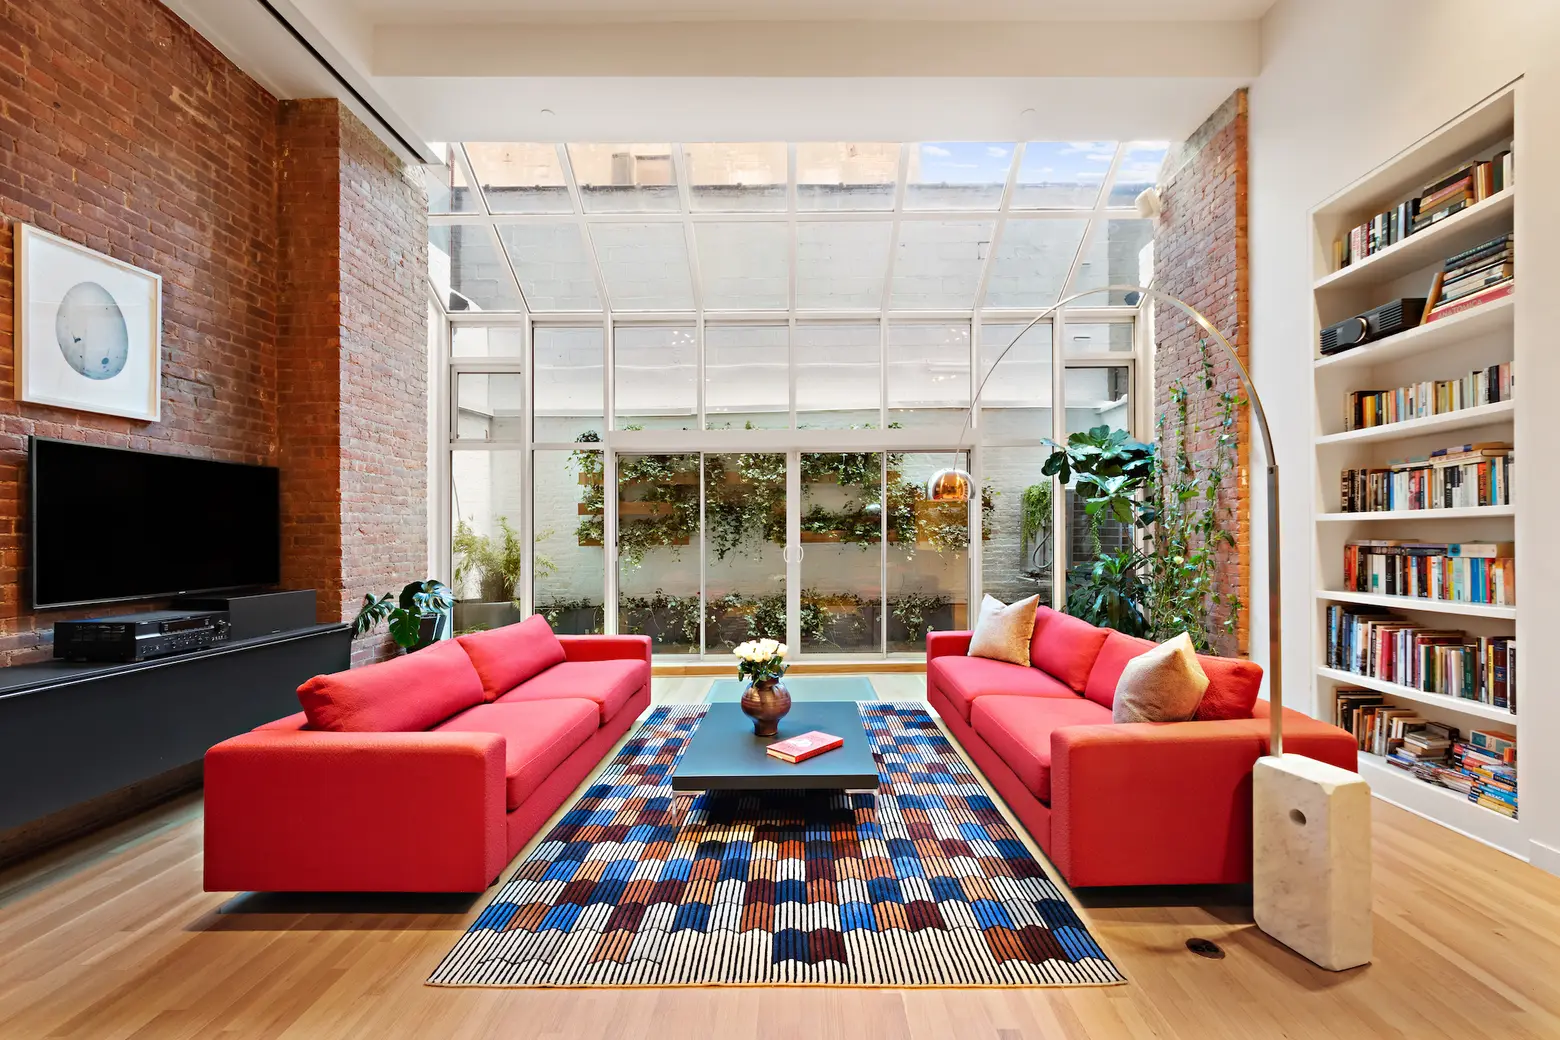 Behind a classic Soho facade, there’s nothing raw about this $4.25M loft triplex